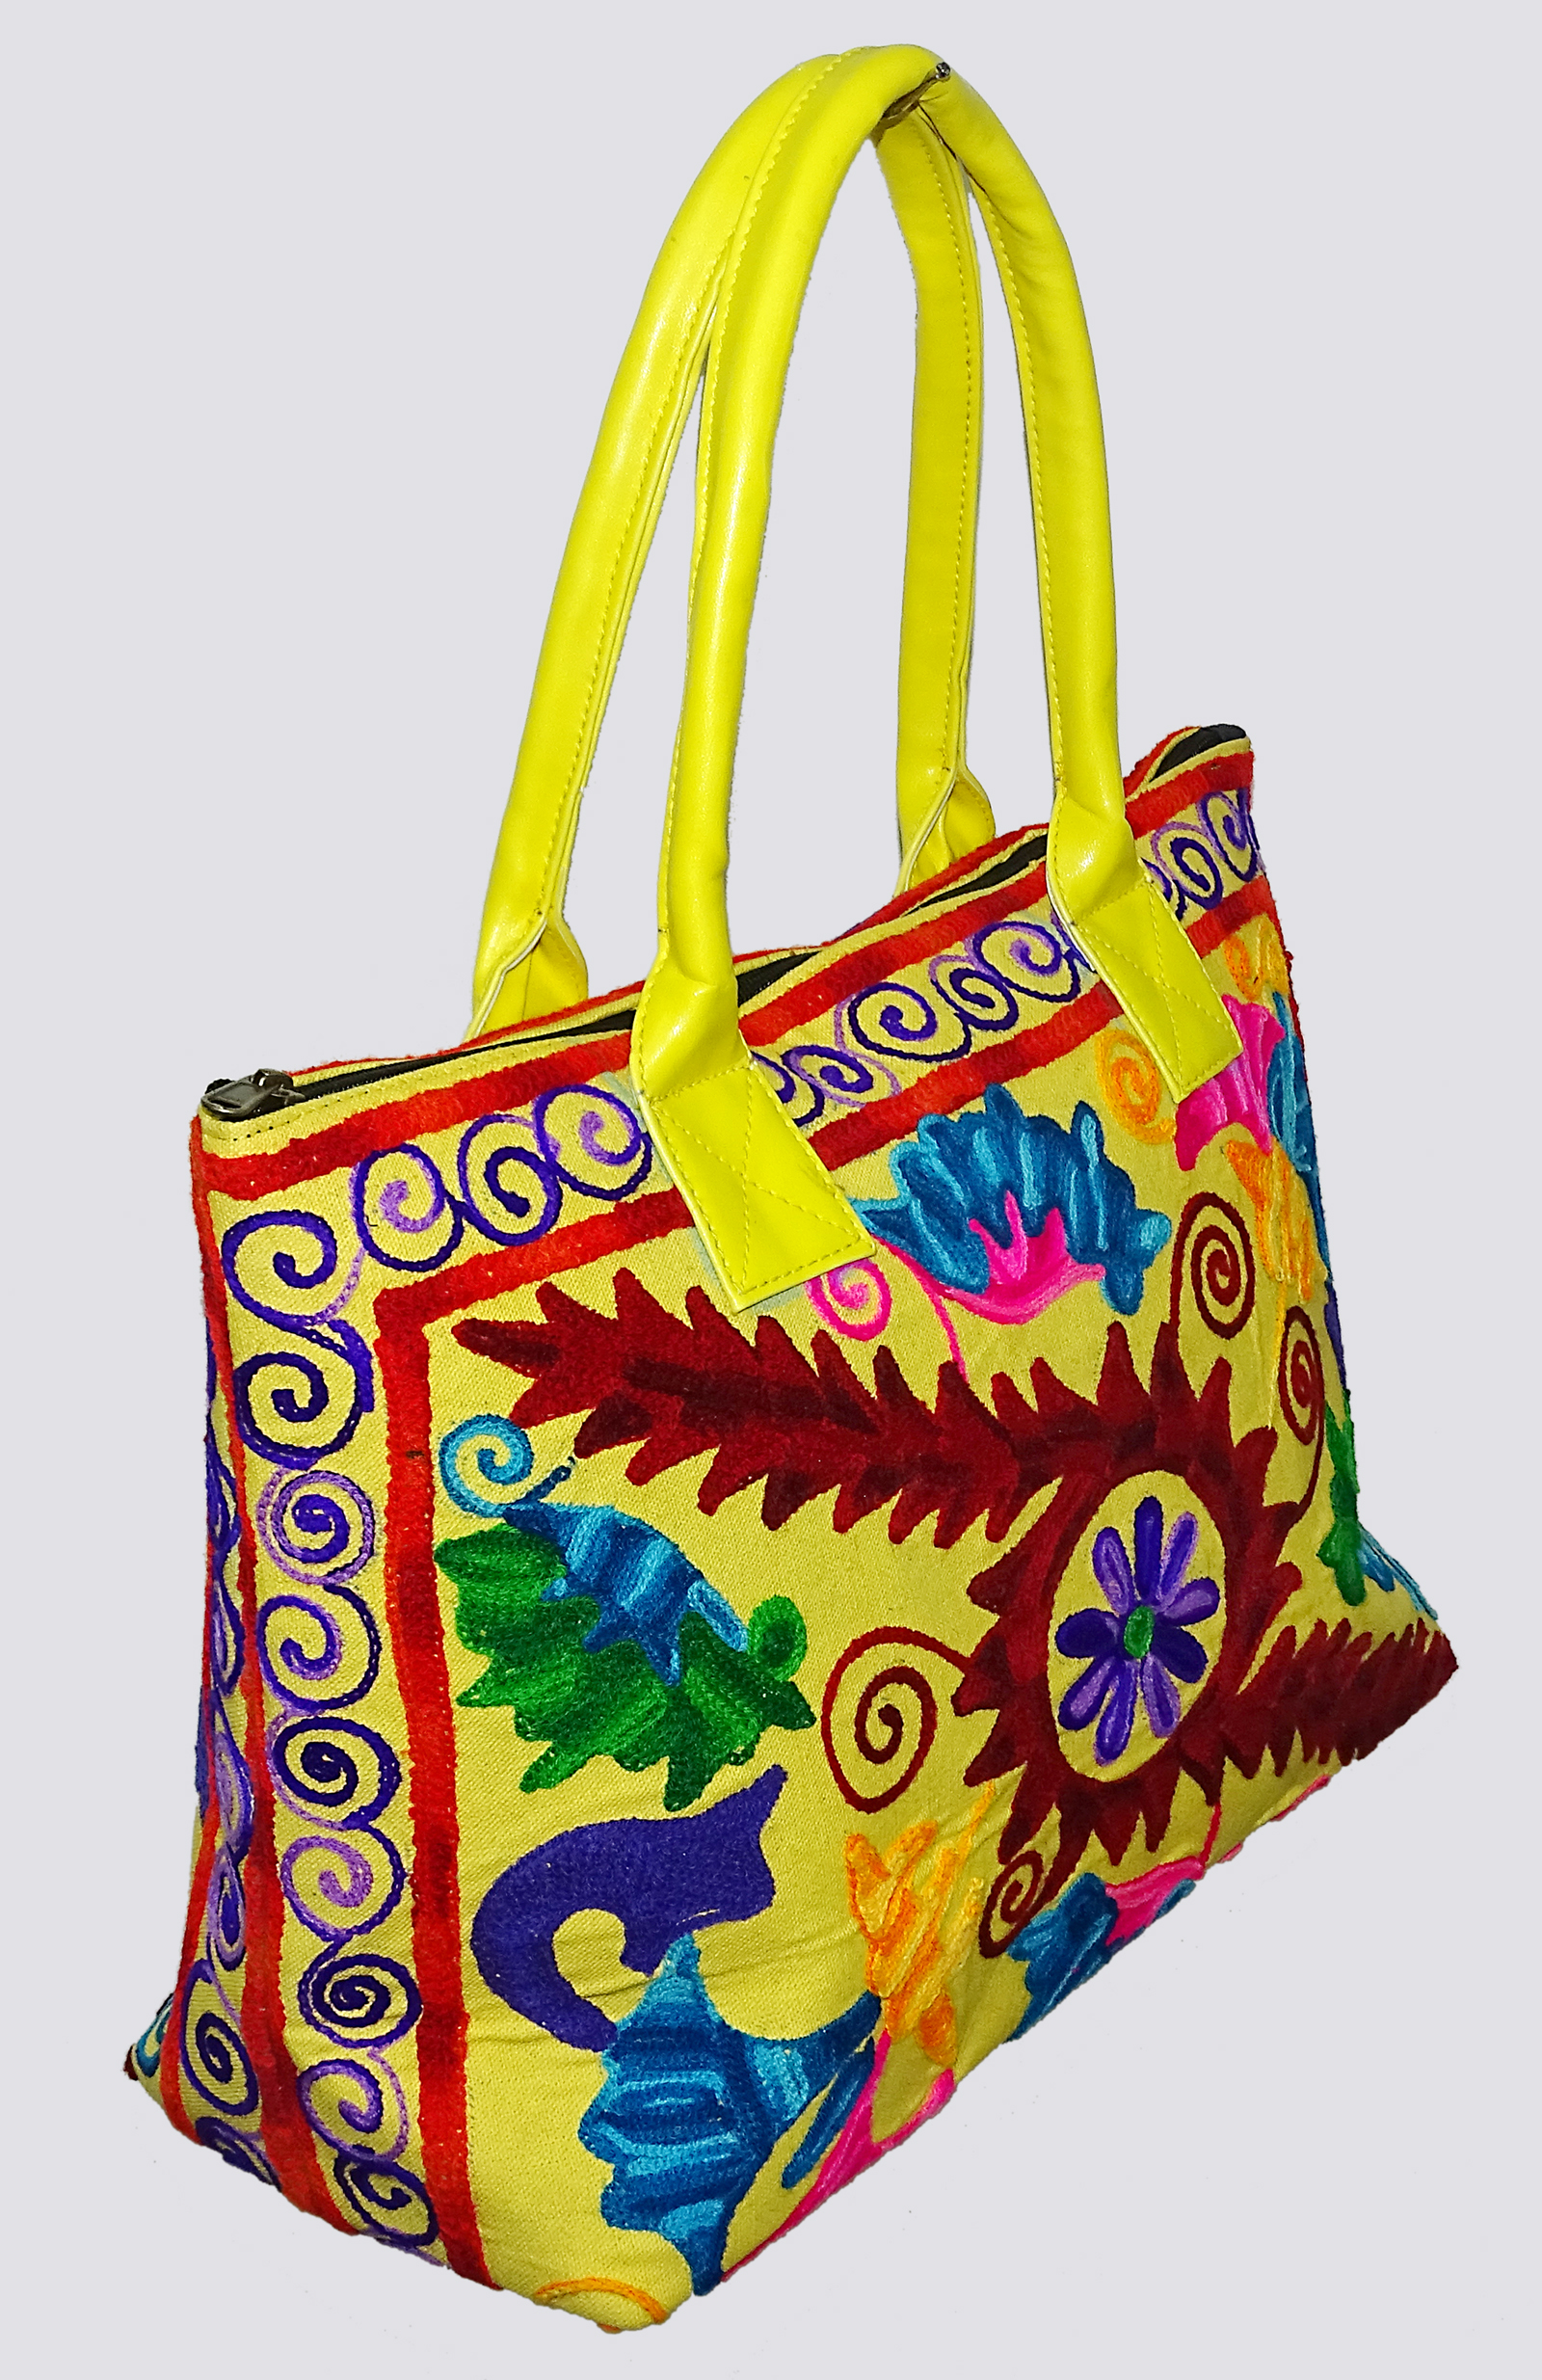 Embroidery Designer Bags